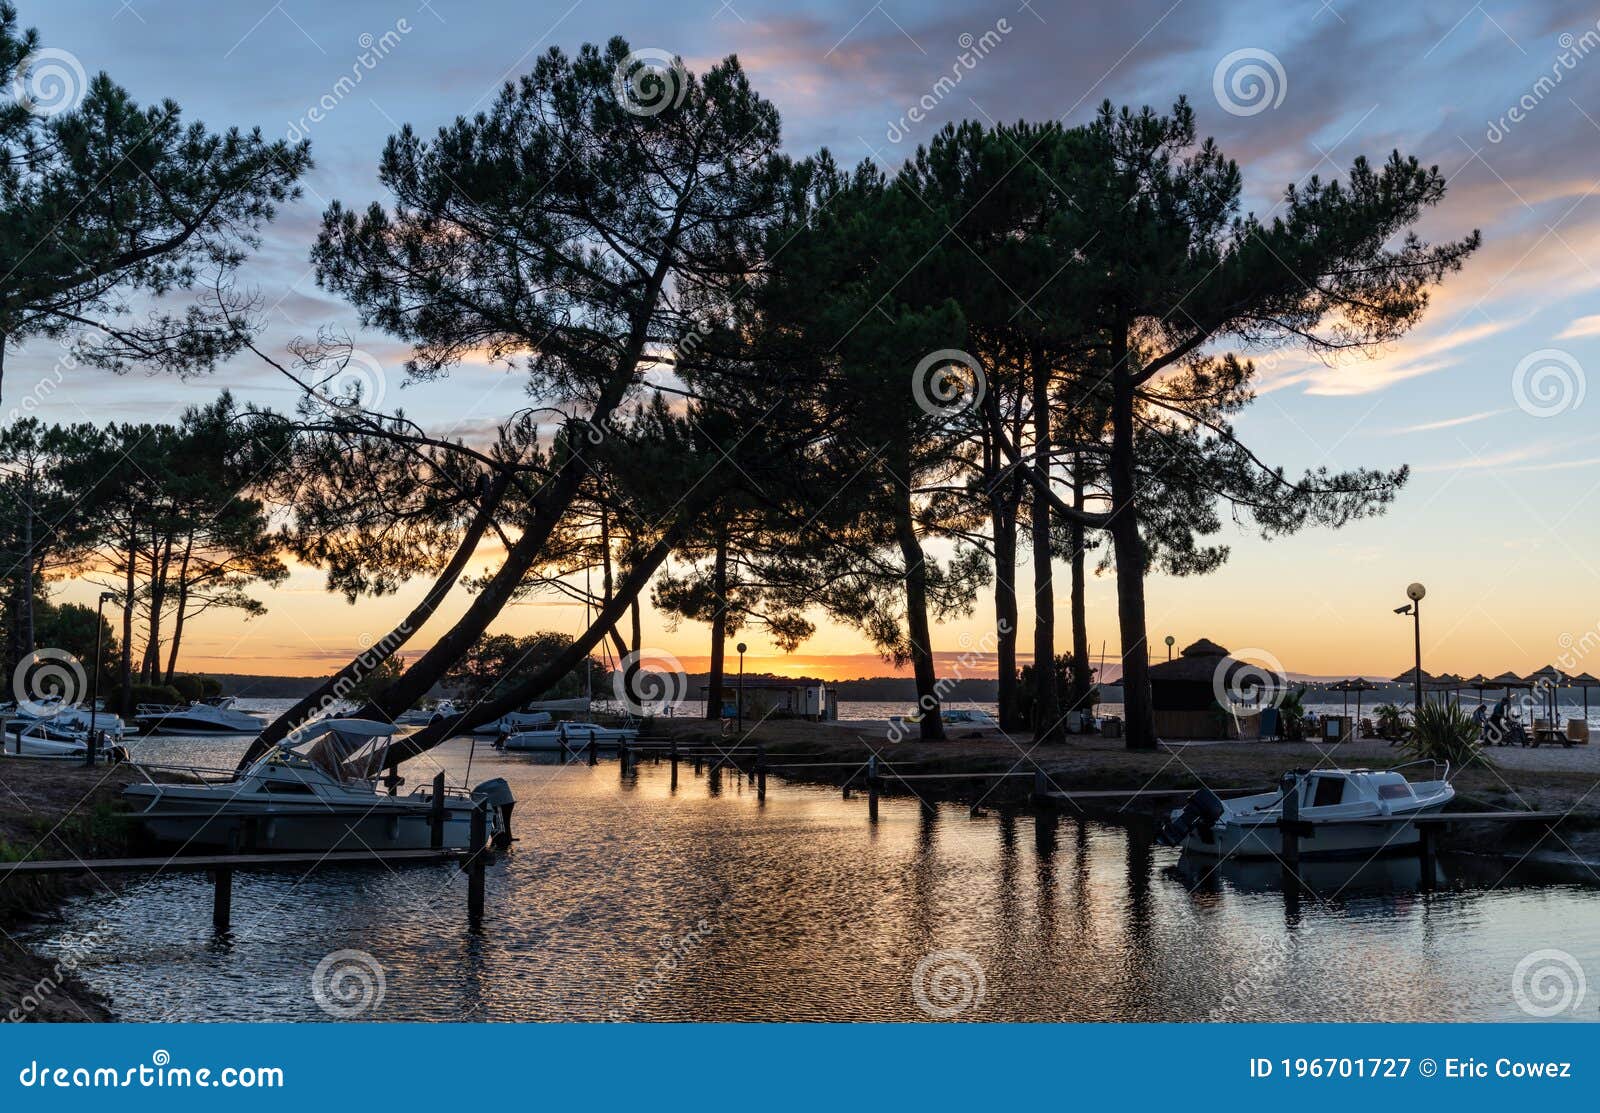 sunset on the lake of biscarrosse in france